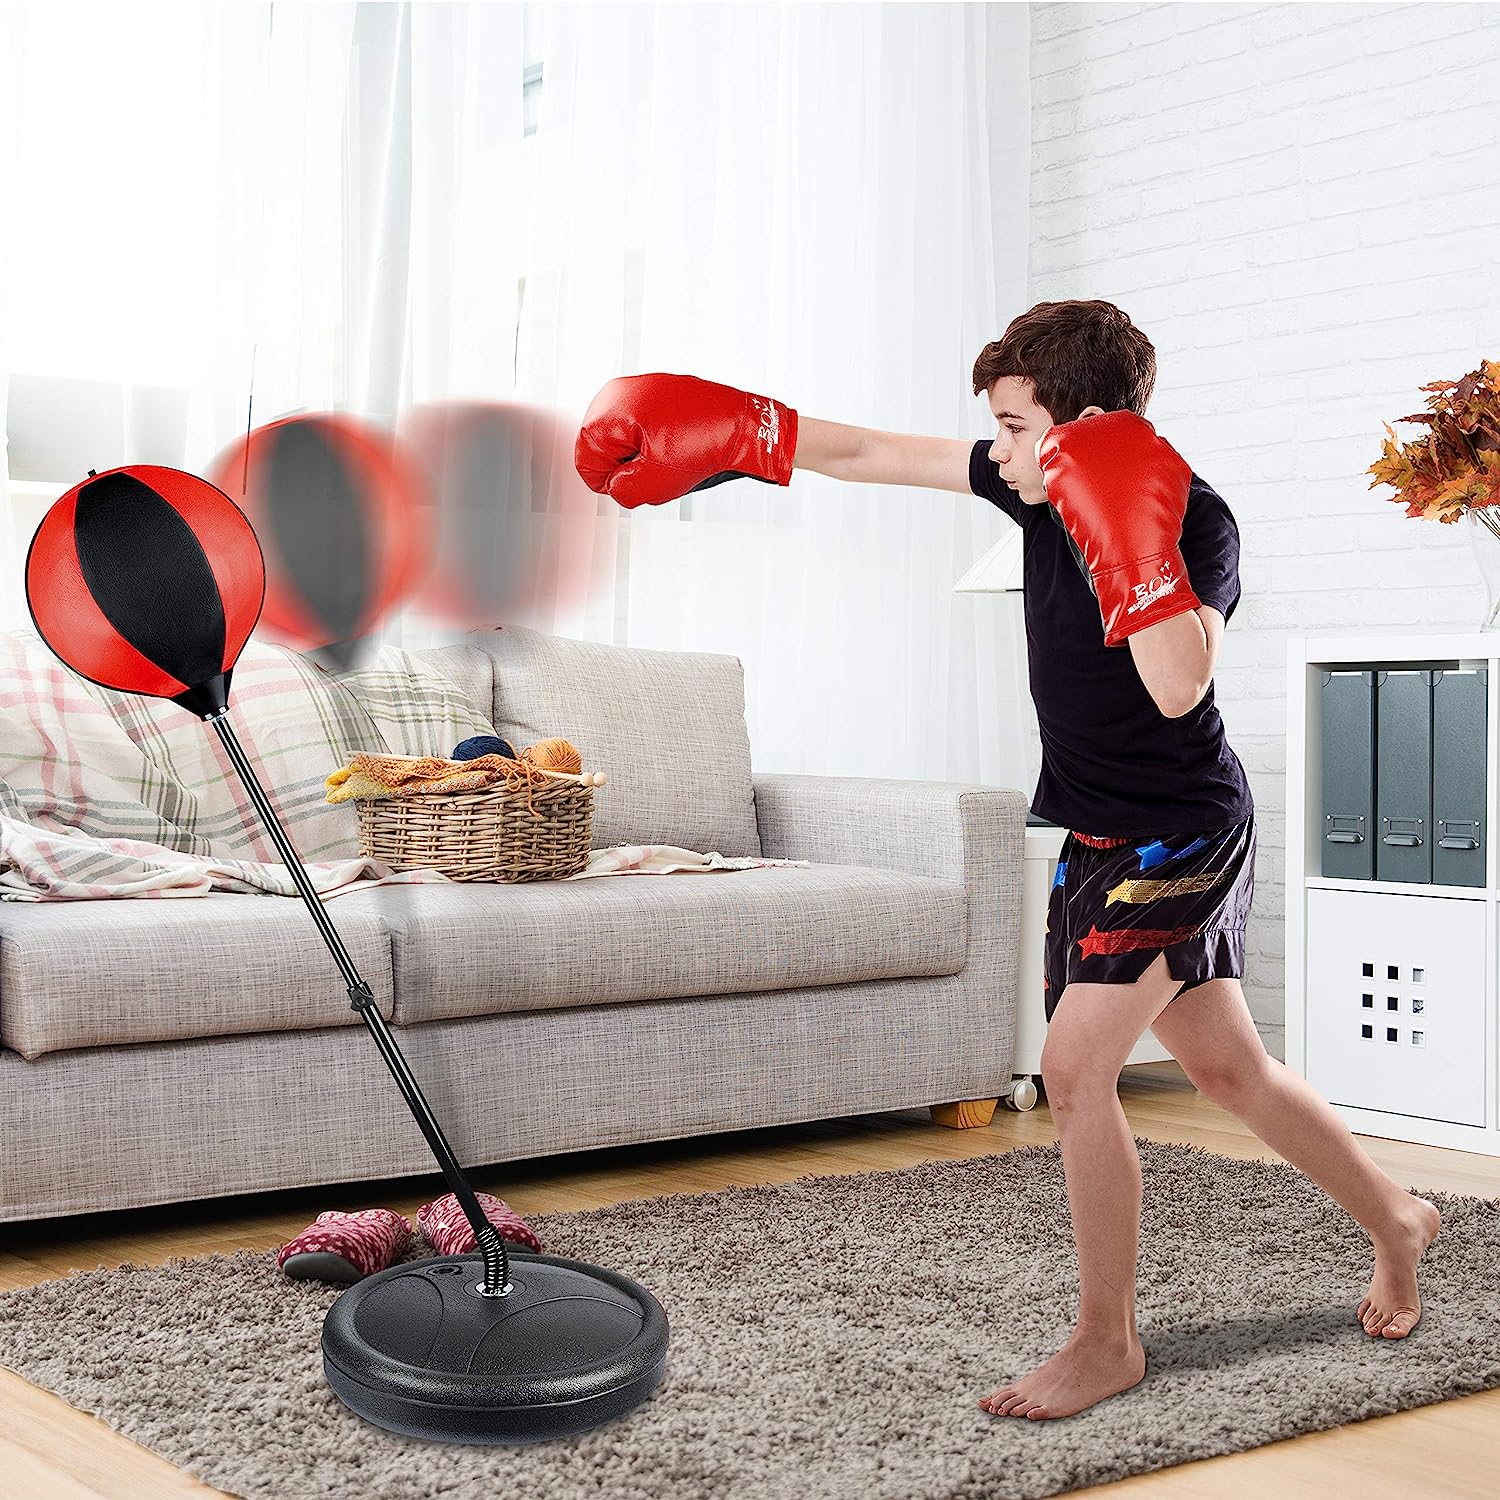 Punching Bag Set for Kids Incl Punching Ball with Stand, Boxing Training  Gloves, Hand Pump and Adjustable Height Stand, Boxing Ball Set Toy Gifts  for